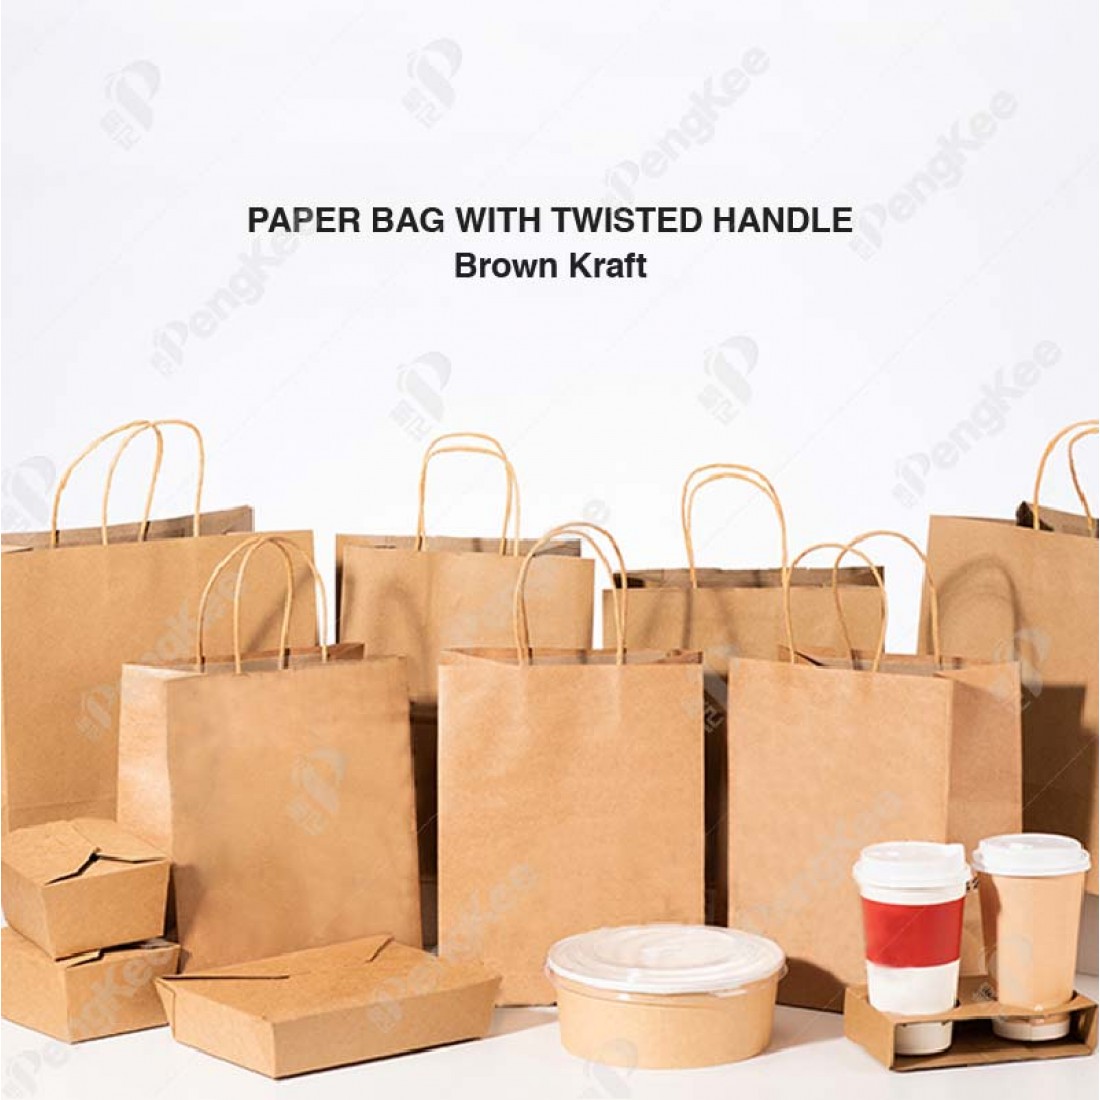 BROWN TWISTED HANDLE PAPER BAG NO.2- 28 X 28 X 15 (CM)